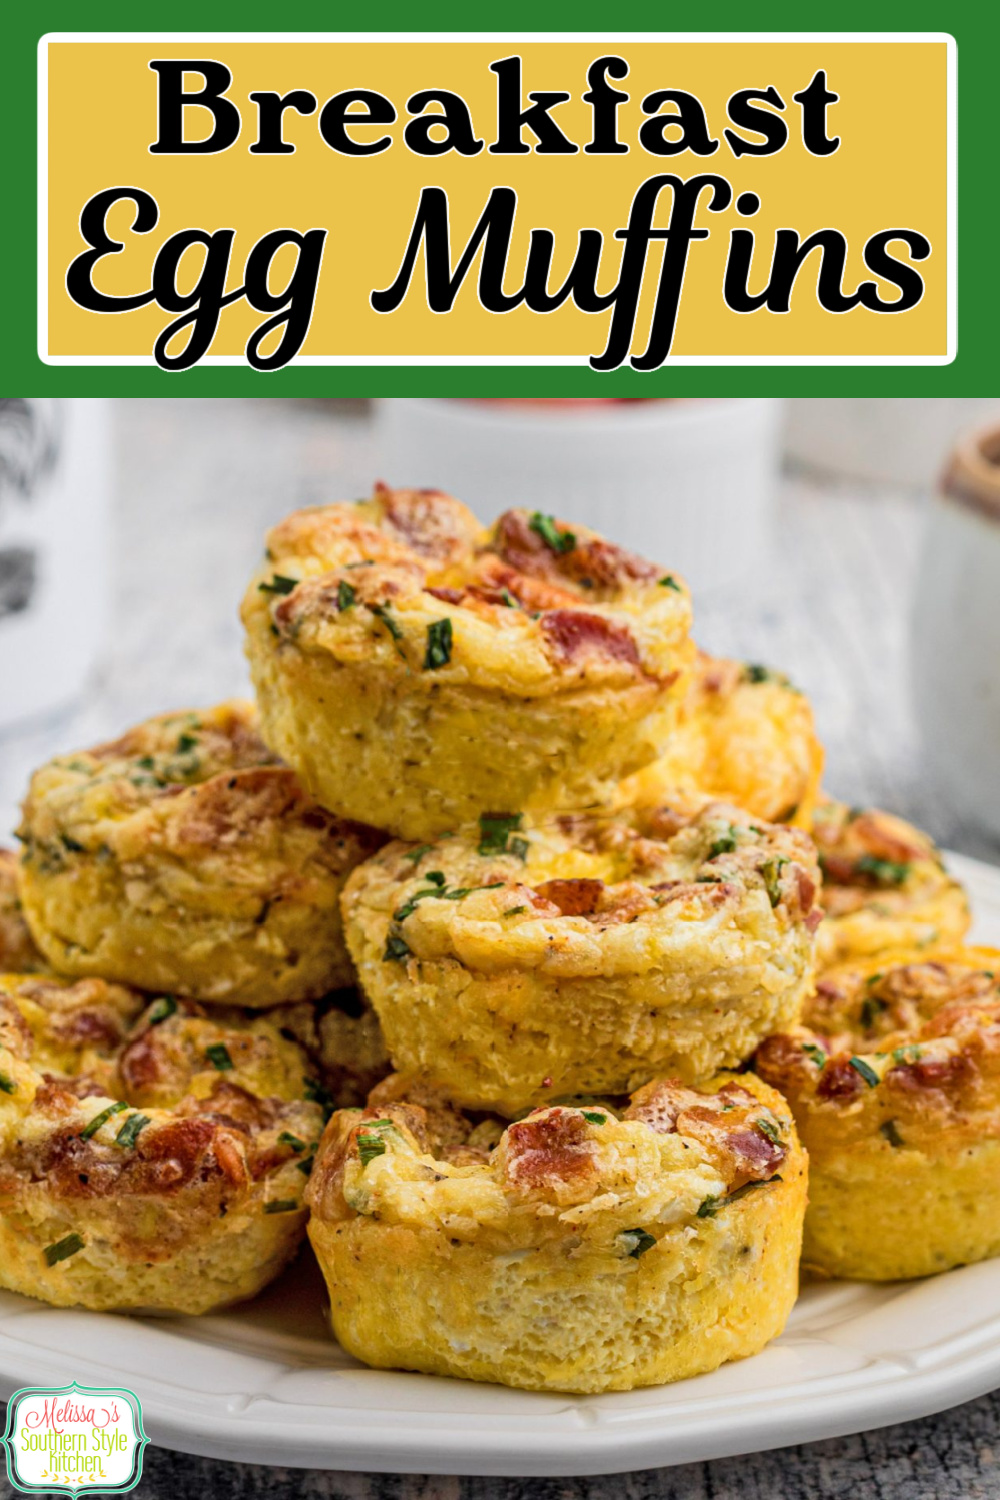 These Breakfast Egg Muffins are made in a cupcake pan for individual serving size portions making them ideal for busy mornings on the go #breakfastmuffins #eggmuffins #eggs #easyeggrecipes #muffins #muffinrecipes #lowcarb #ketomuffins via @melissasssk